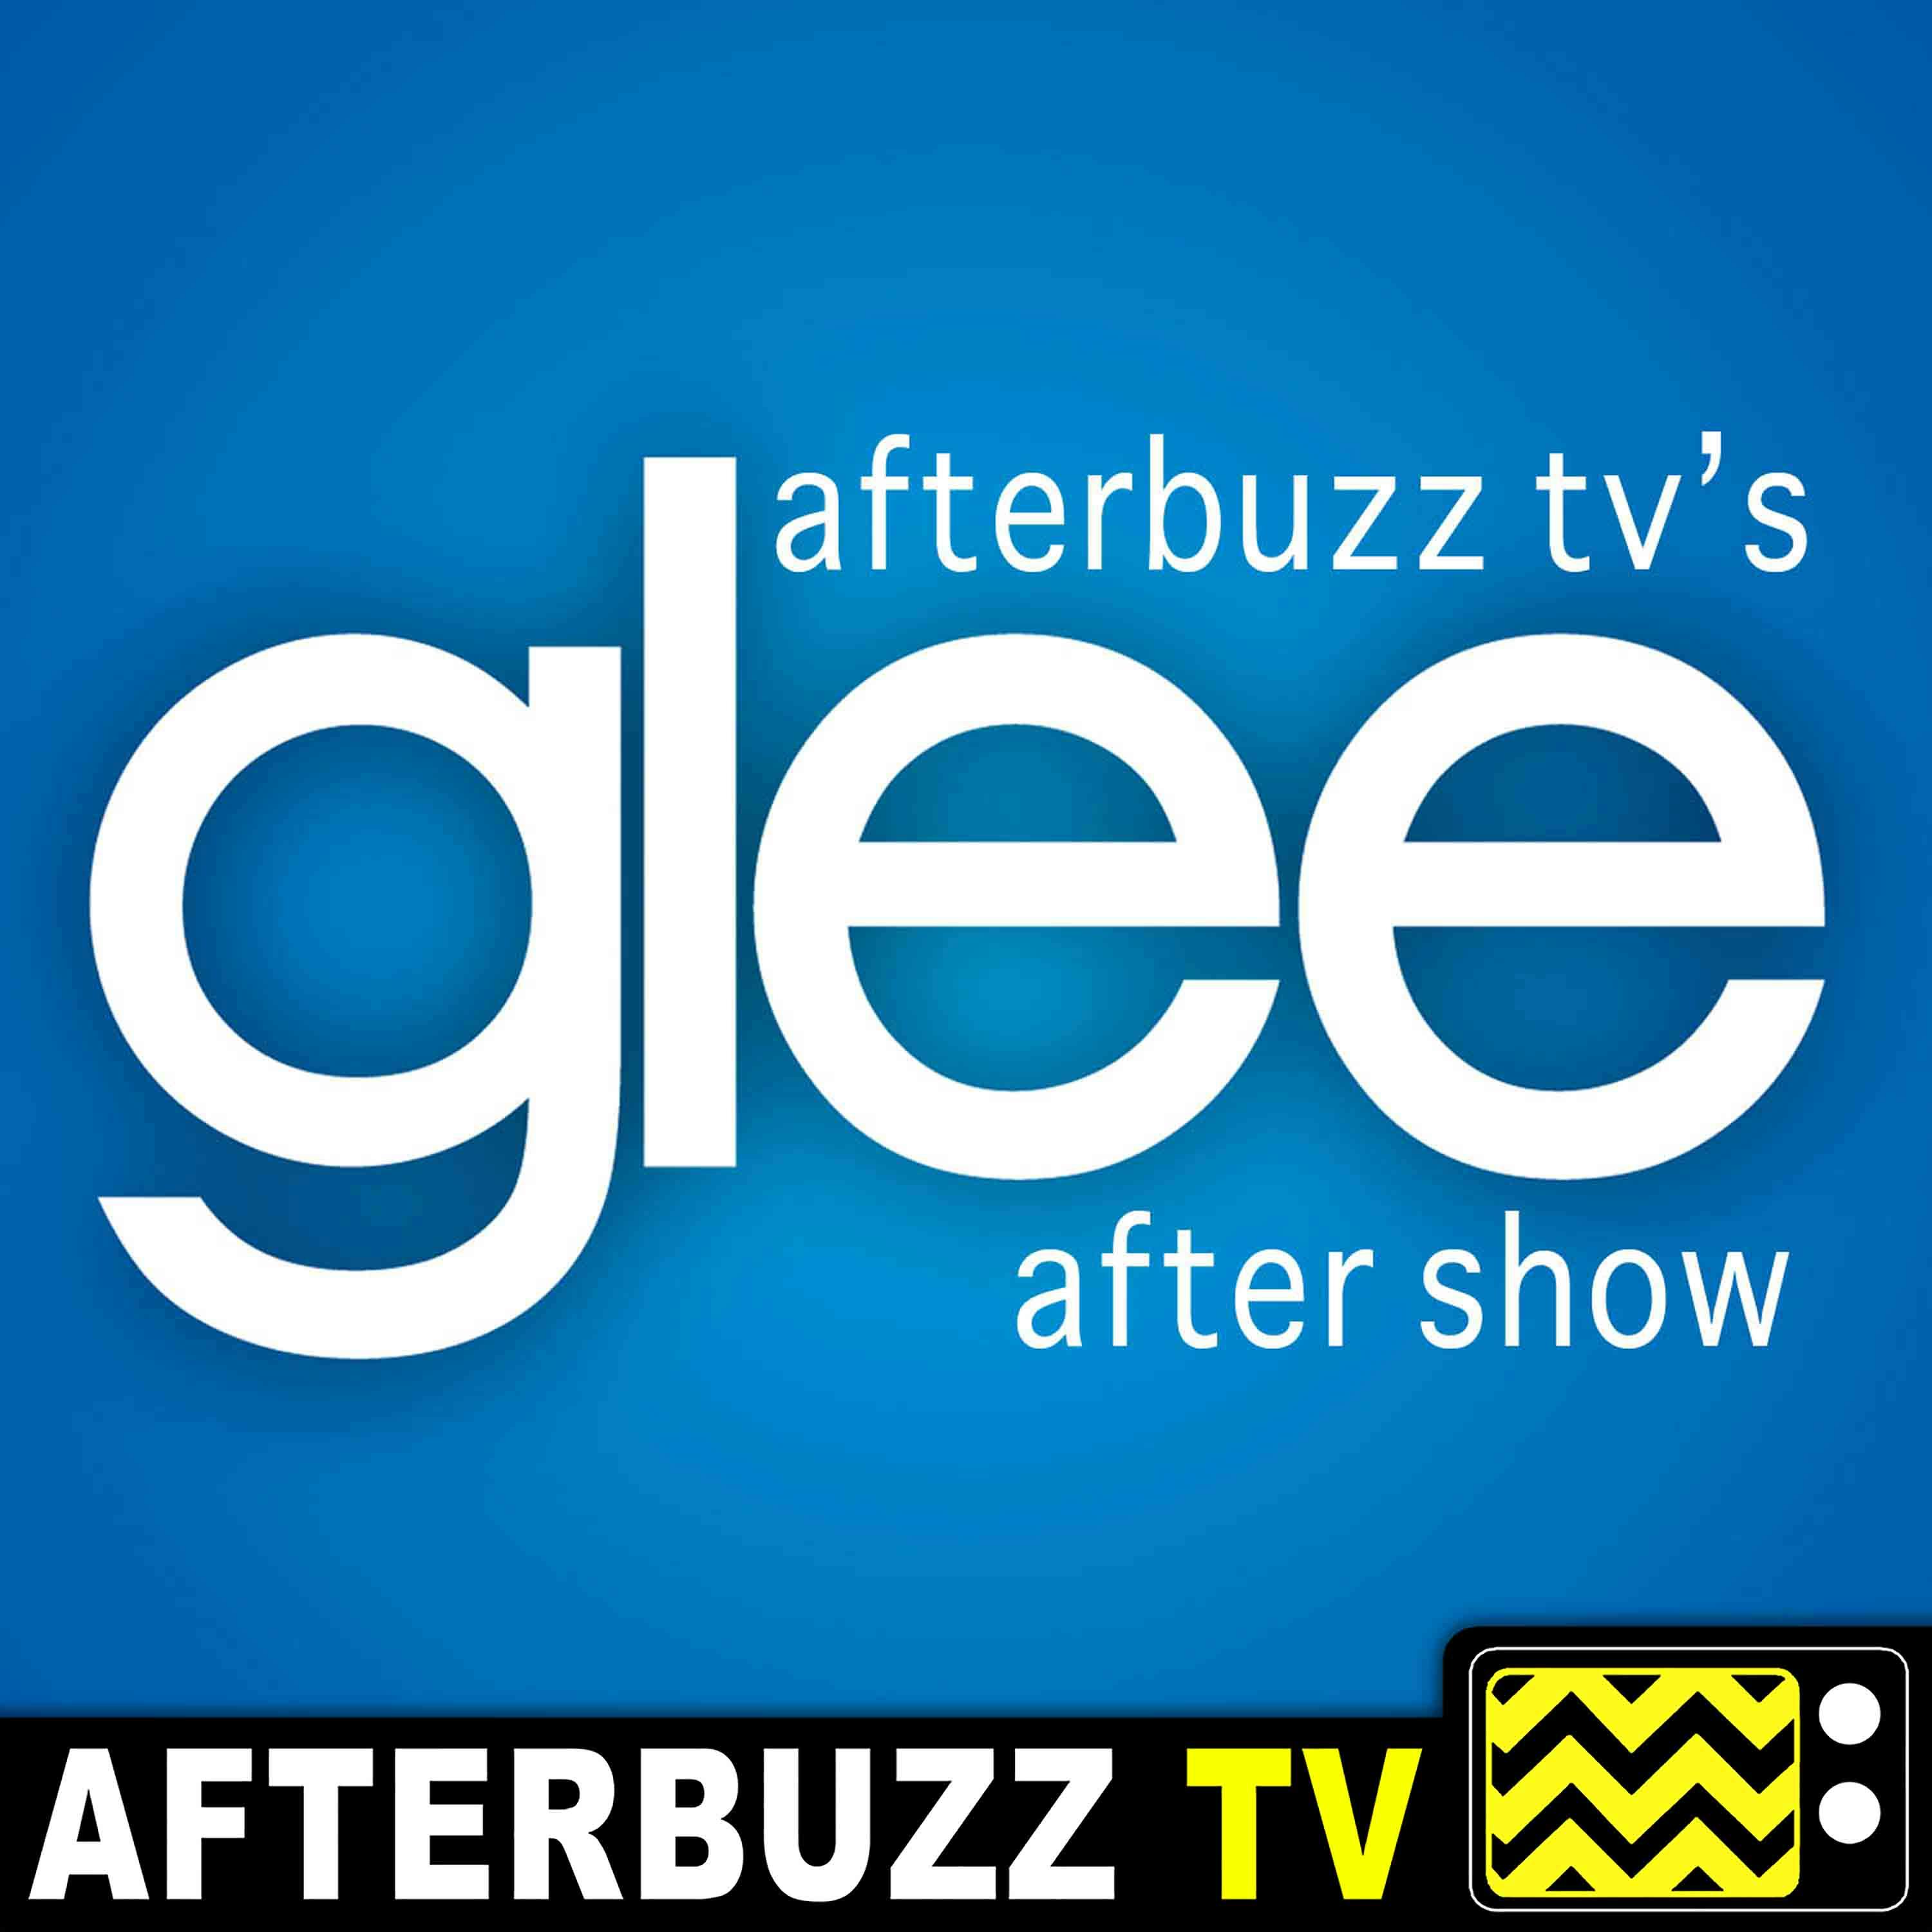 Glee S:5 | New Directions E:13 | AfterBuzz TV AfterShow